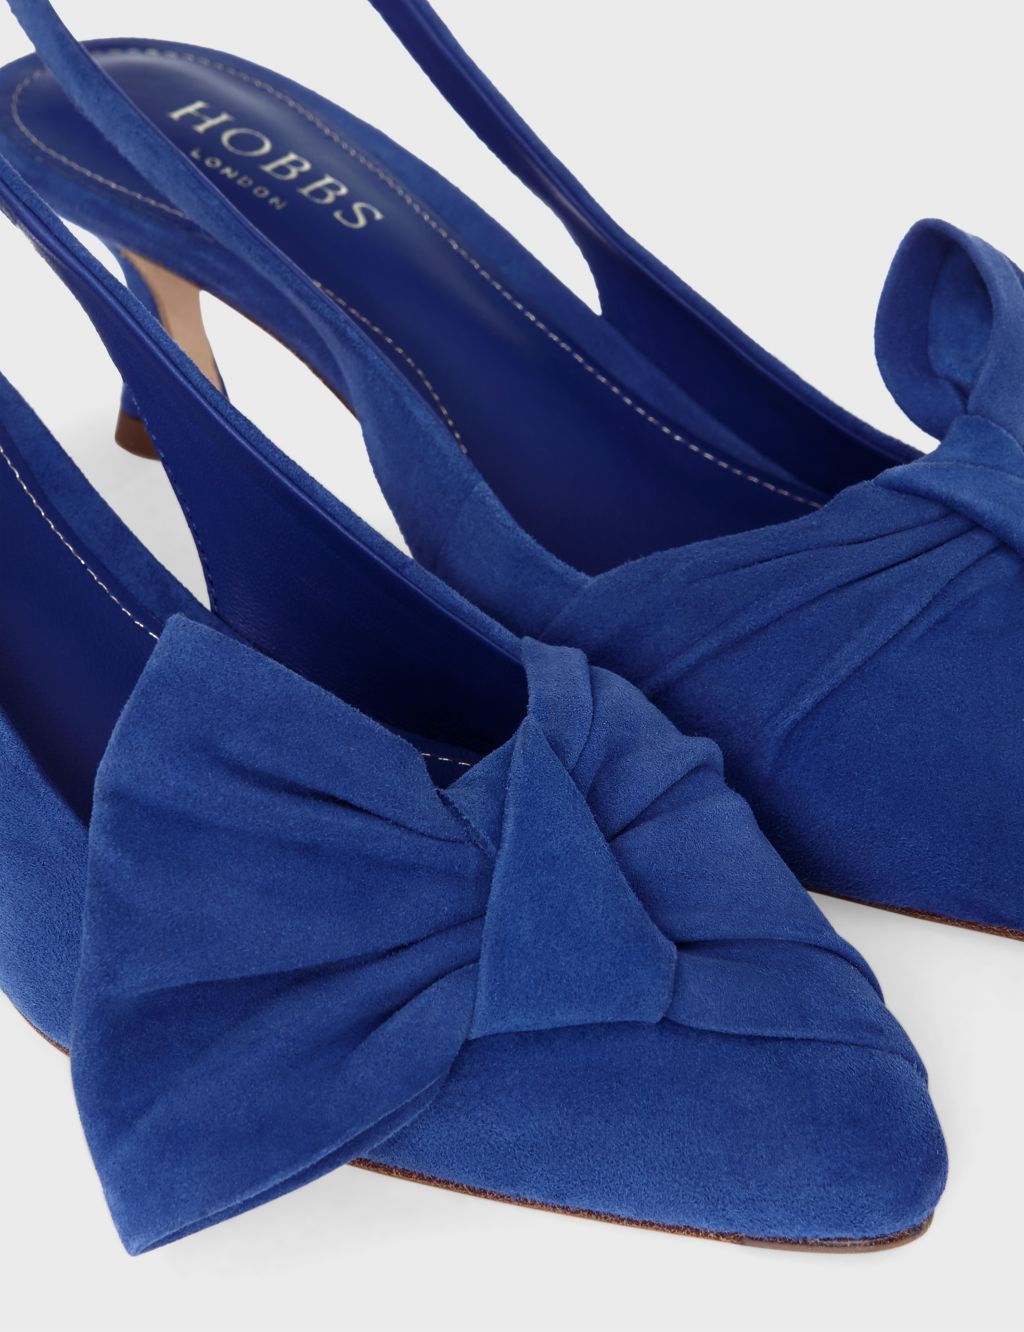 Suede Bow Kitten Heel Slingback Shoes image 5